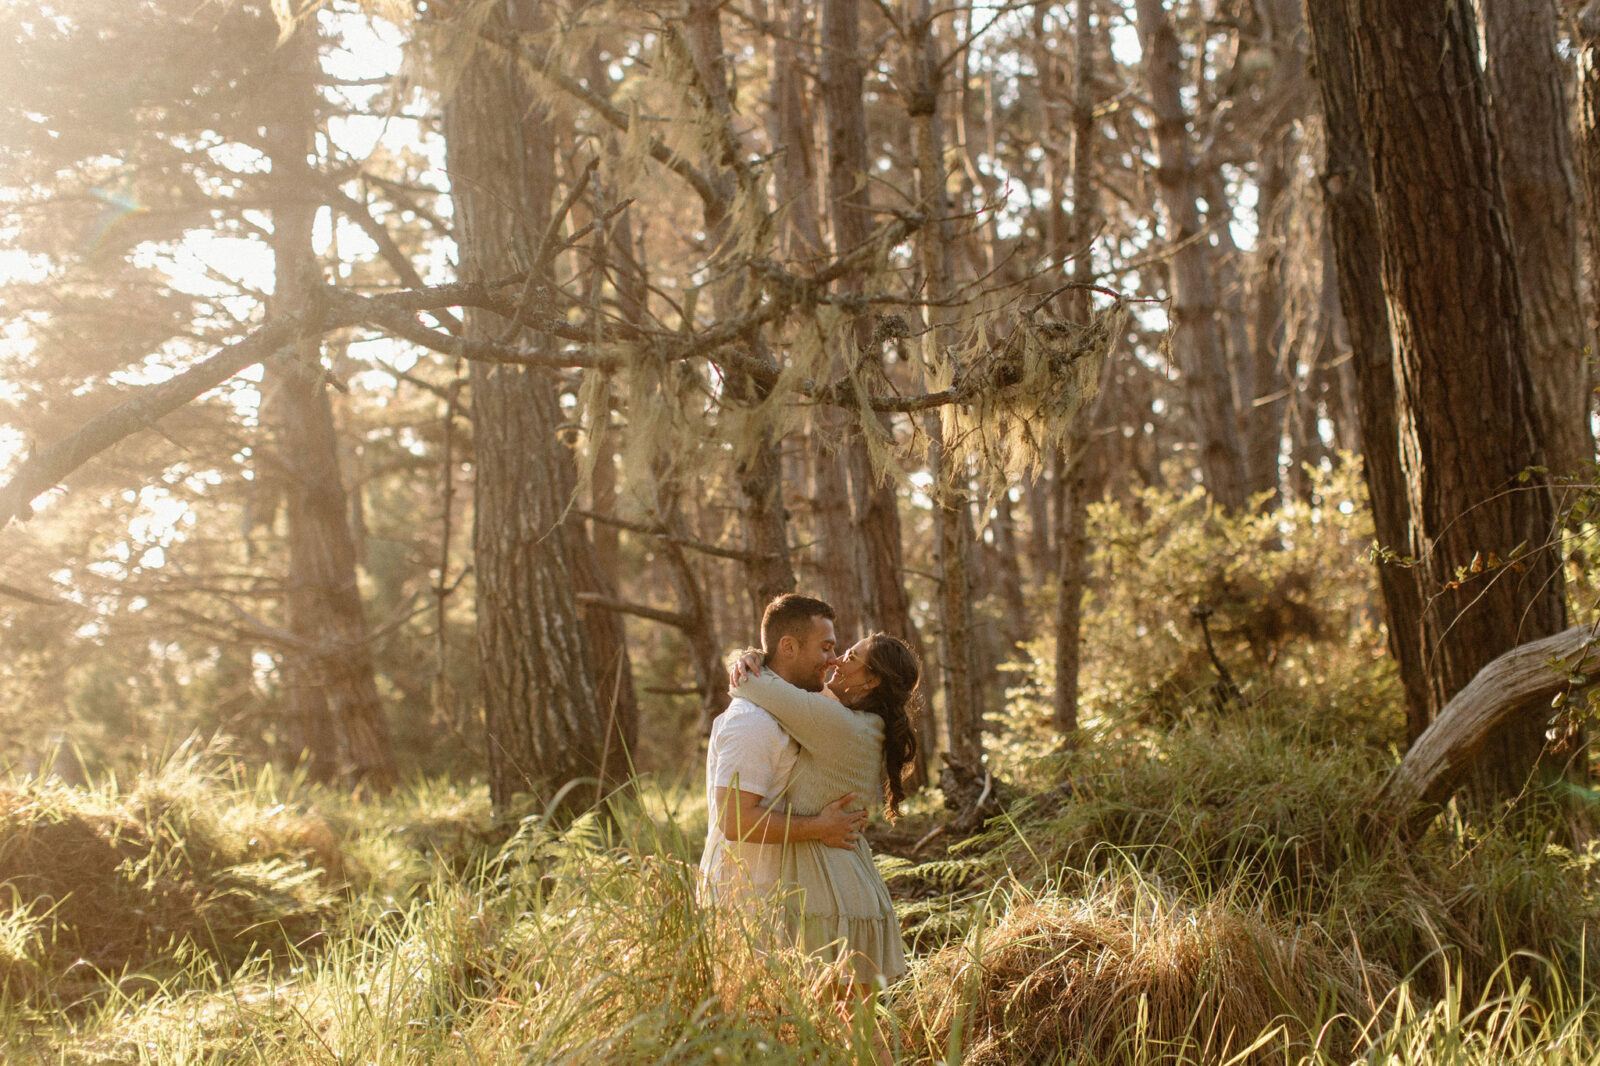 Woodsy engagement photos near Jenner, CA